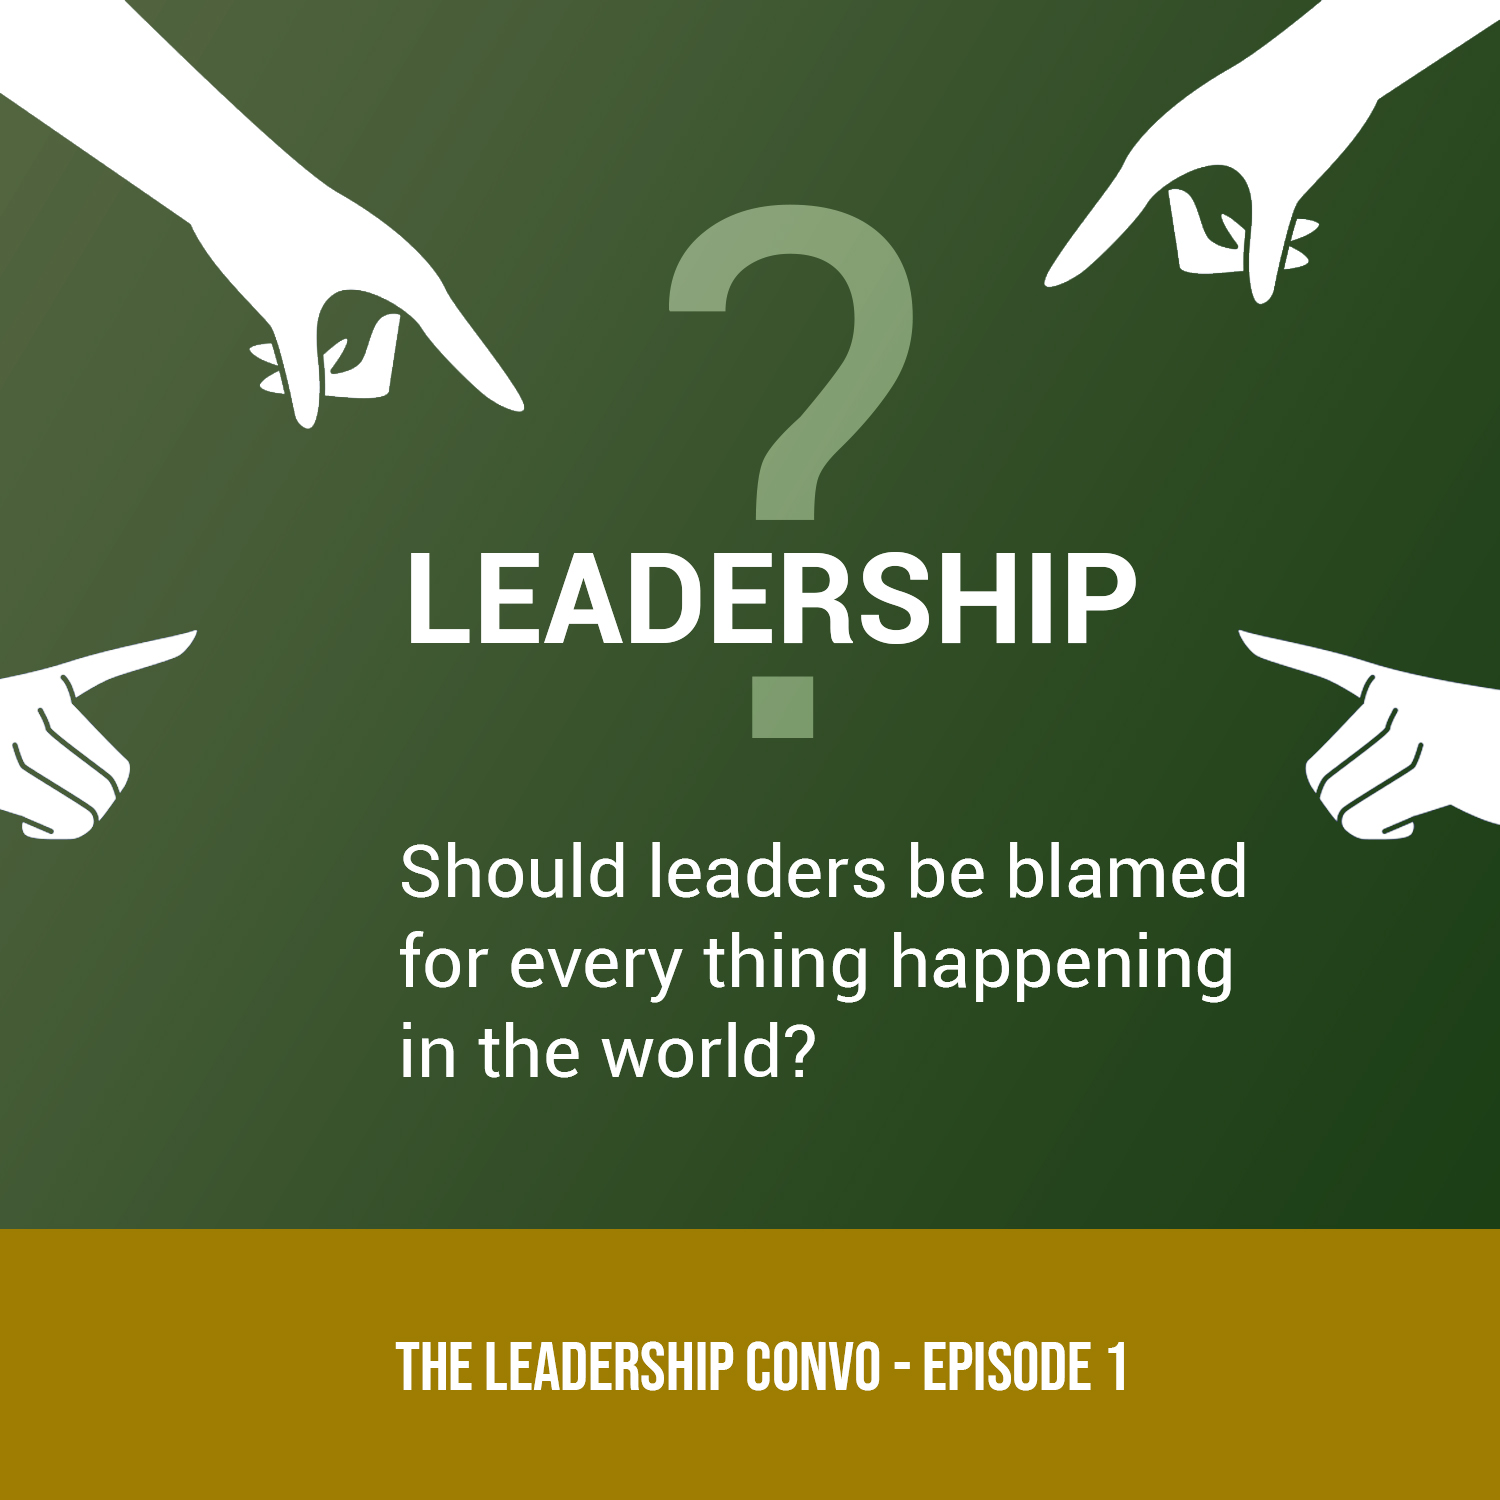 SHOULD LEADERS BE BLAMED FOR EVERYTHING HAPPENING IN THE WORLD?